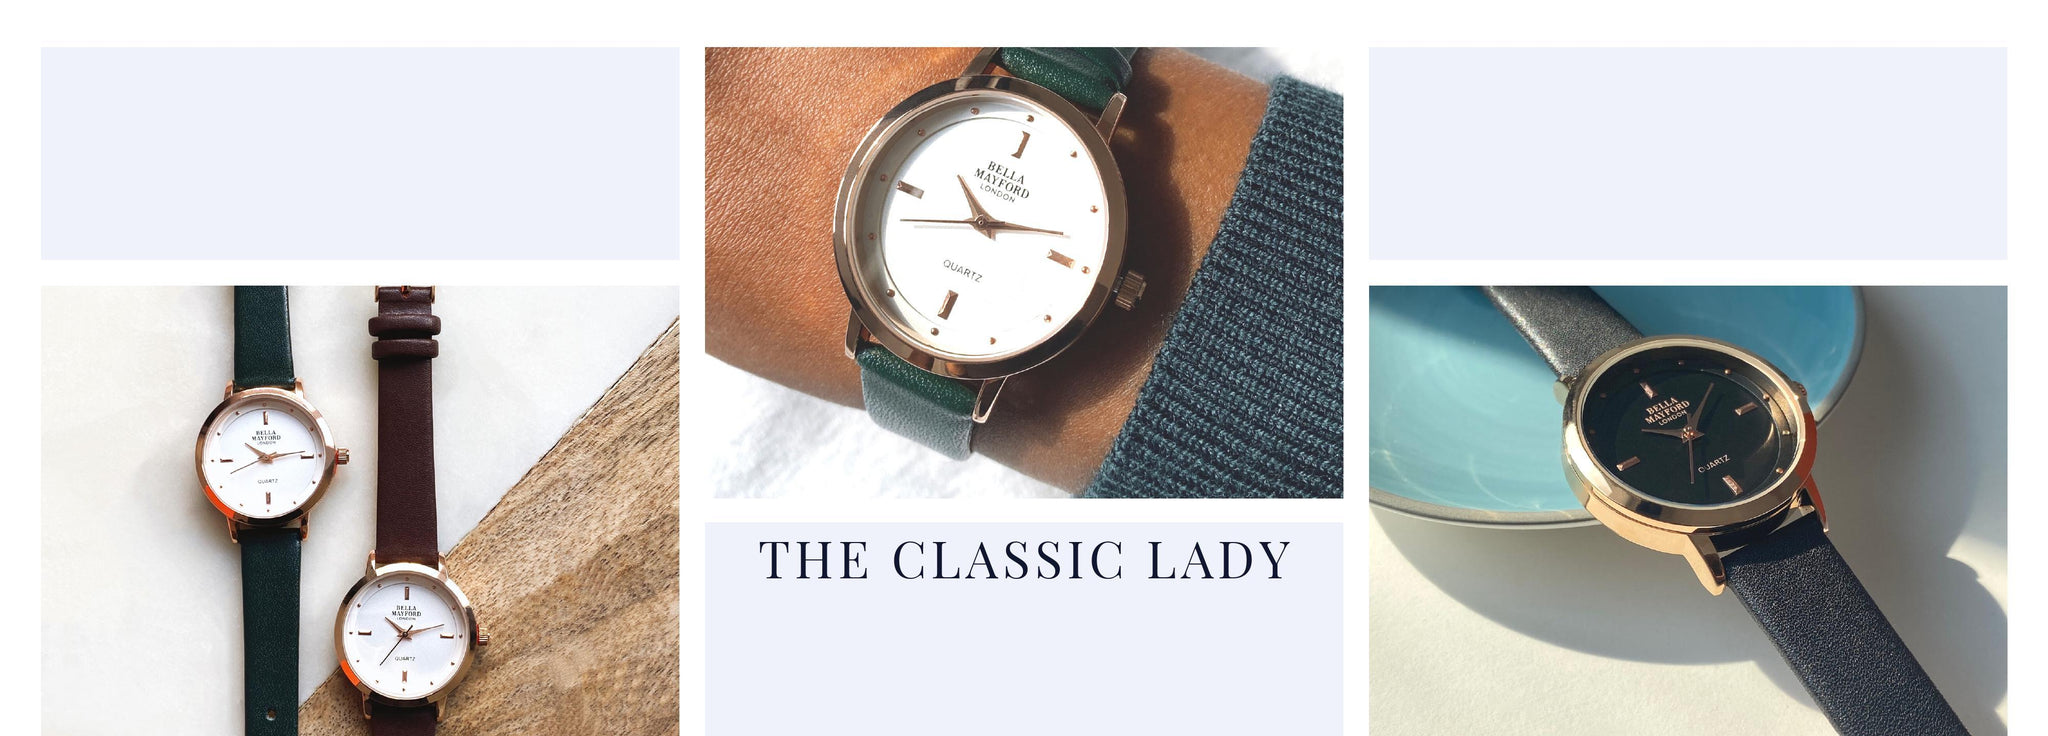 The Classic Lady Watch by Bella Mayford